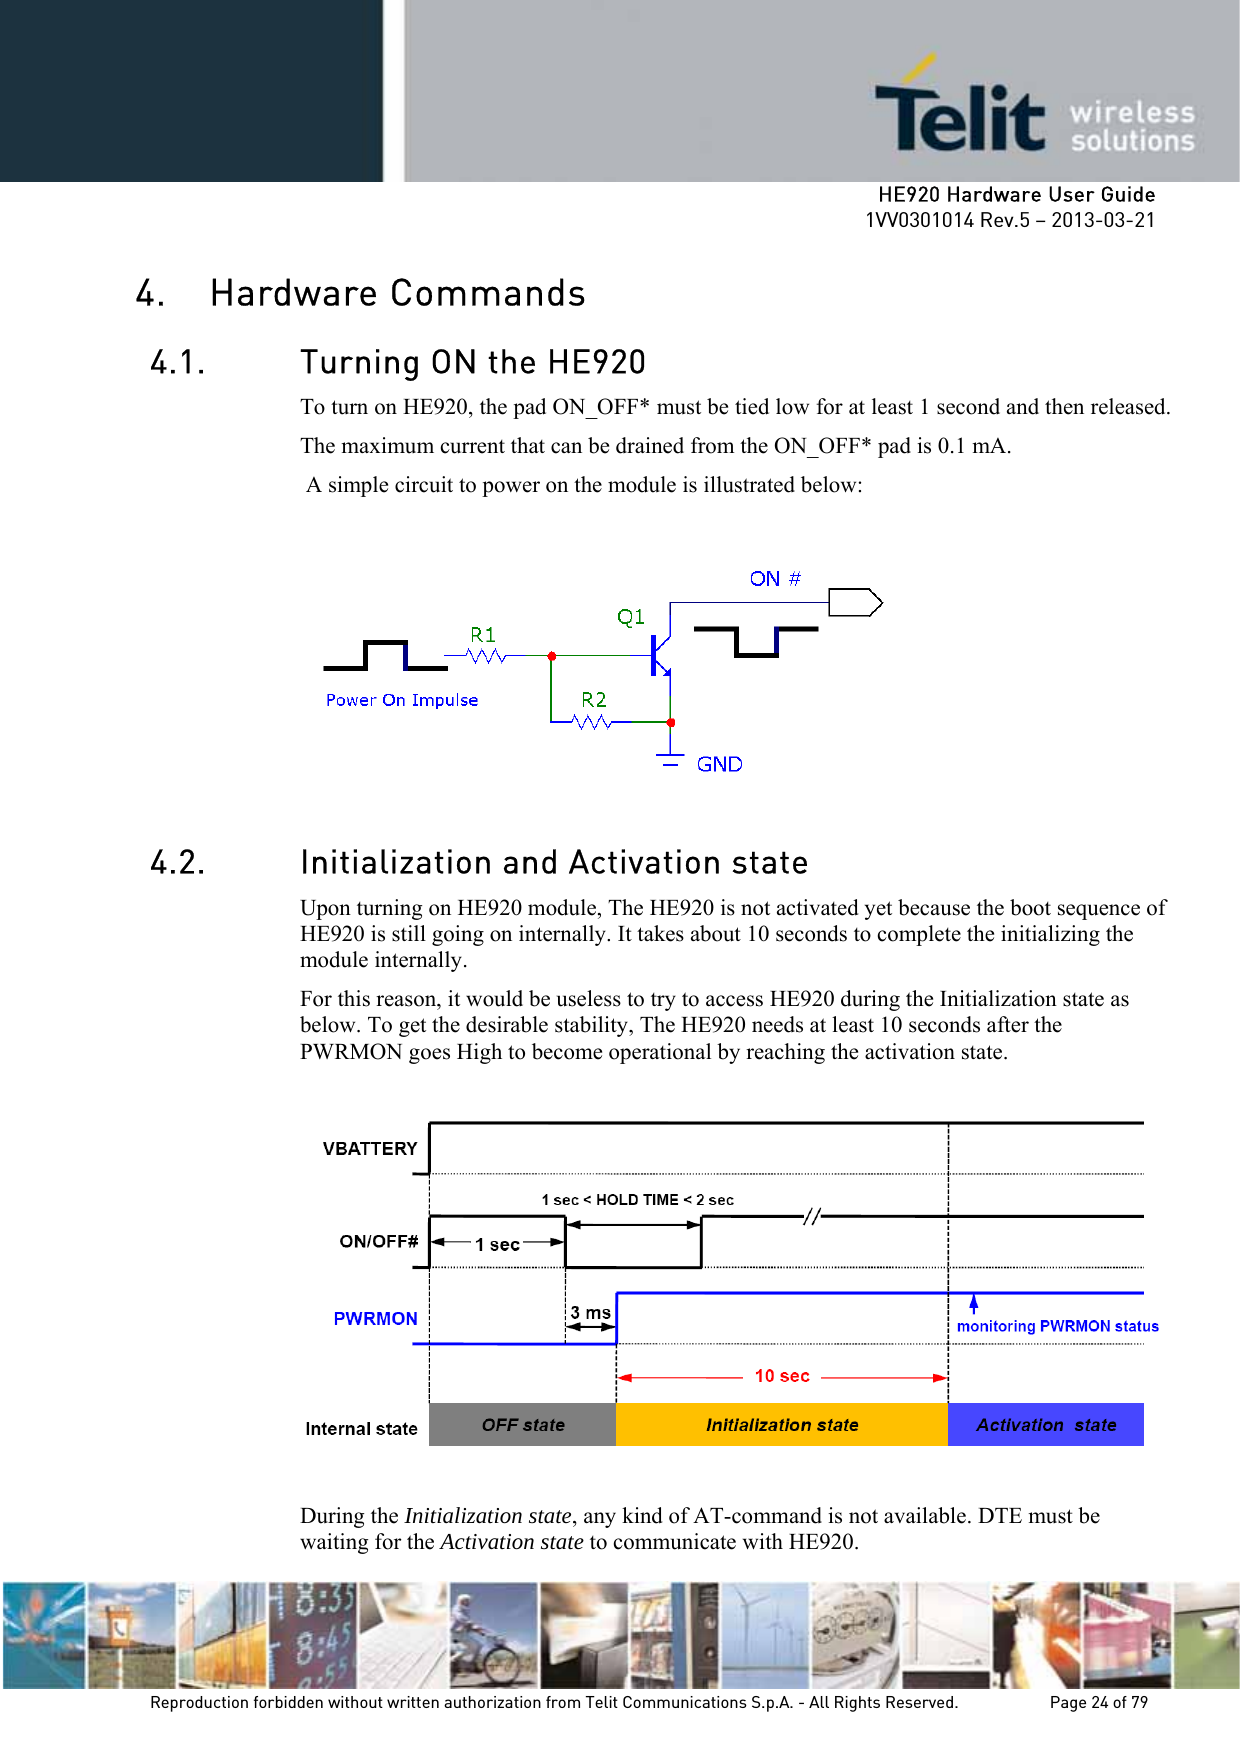     HE920 Hardware User Guide 1VV0301014 Rev.5 – 2013-03-21 Reproduction forbidden without written authorization from Telit Communications S.p.A. - All Rights Reserved.    Page 24 of 79  4. Hardware Commands 4.1. Turning ON the HE920 To turn on HE920, the pad ON_OFF* must be tied low for at least 1 second and then released. The maximum current that can be drained from the ON_OFF* pad is 0.1 mA.  A simple circuit to power on the module is illustrated below:   4.2. Initialization and Activation state Upon turning on HE920 module, The HE920 is not activated yet because the boot sequence of HE920 is still going on internally. It takes about 10 seconds to complete the initializing the module internally. For this reason, it would be useless to try to access HE920 during the Initialization state as below. To get the desirable stability, The HE920 needs at least 10 seconds after the PWRMON goes High to become operational by reaching the activation state.    During the Initialization state, any kind of AT-command is not available. DTE must be waiting for the Activation state to communicate with HE920. 